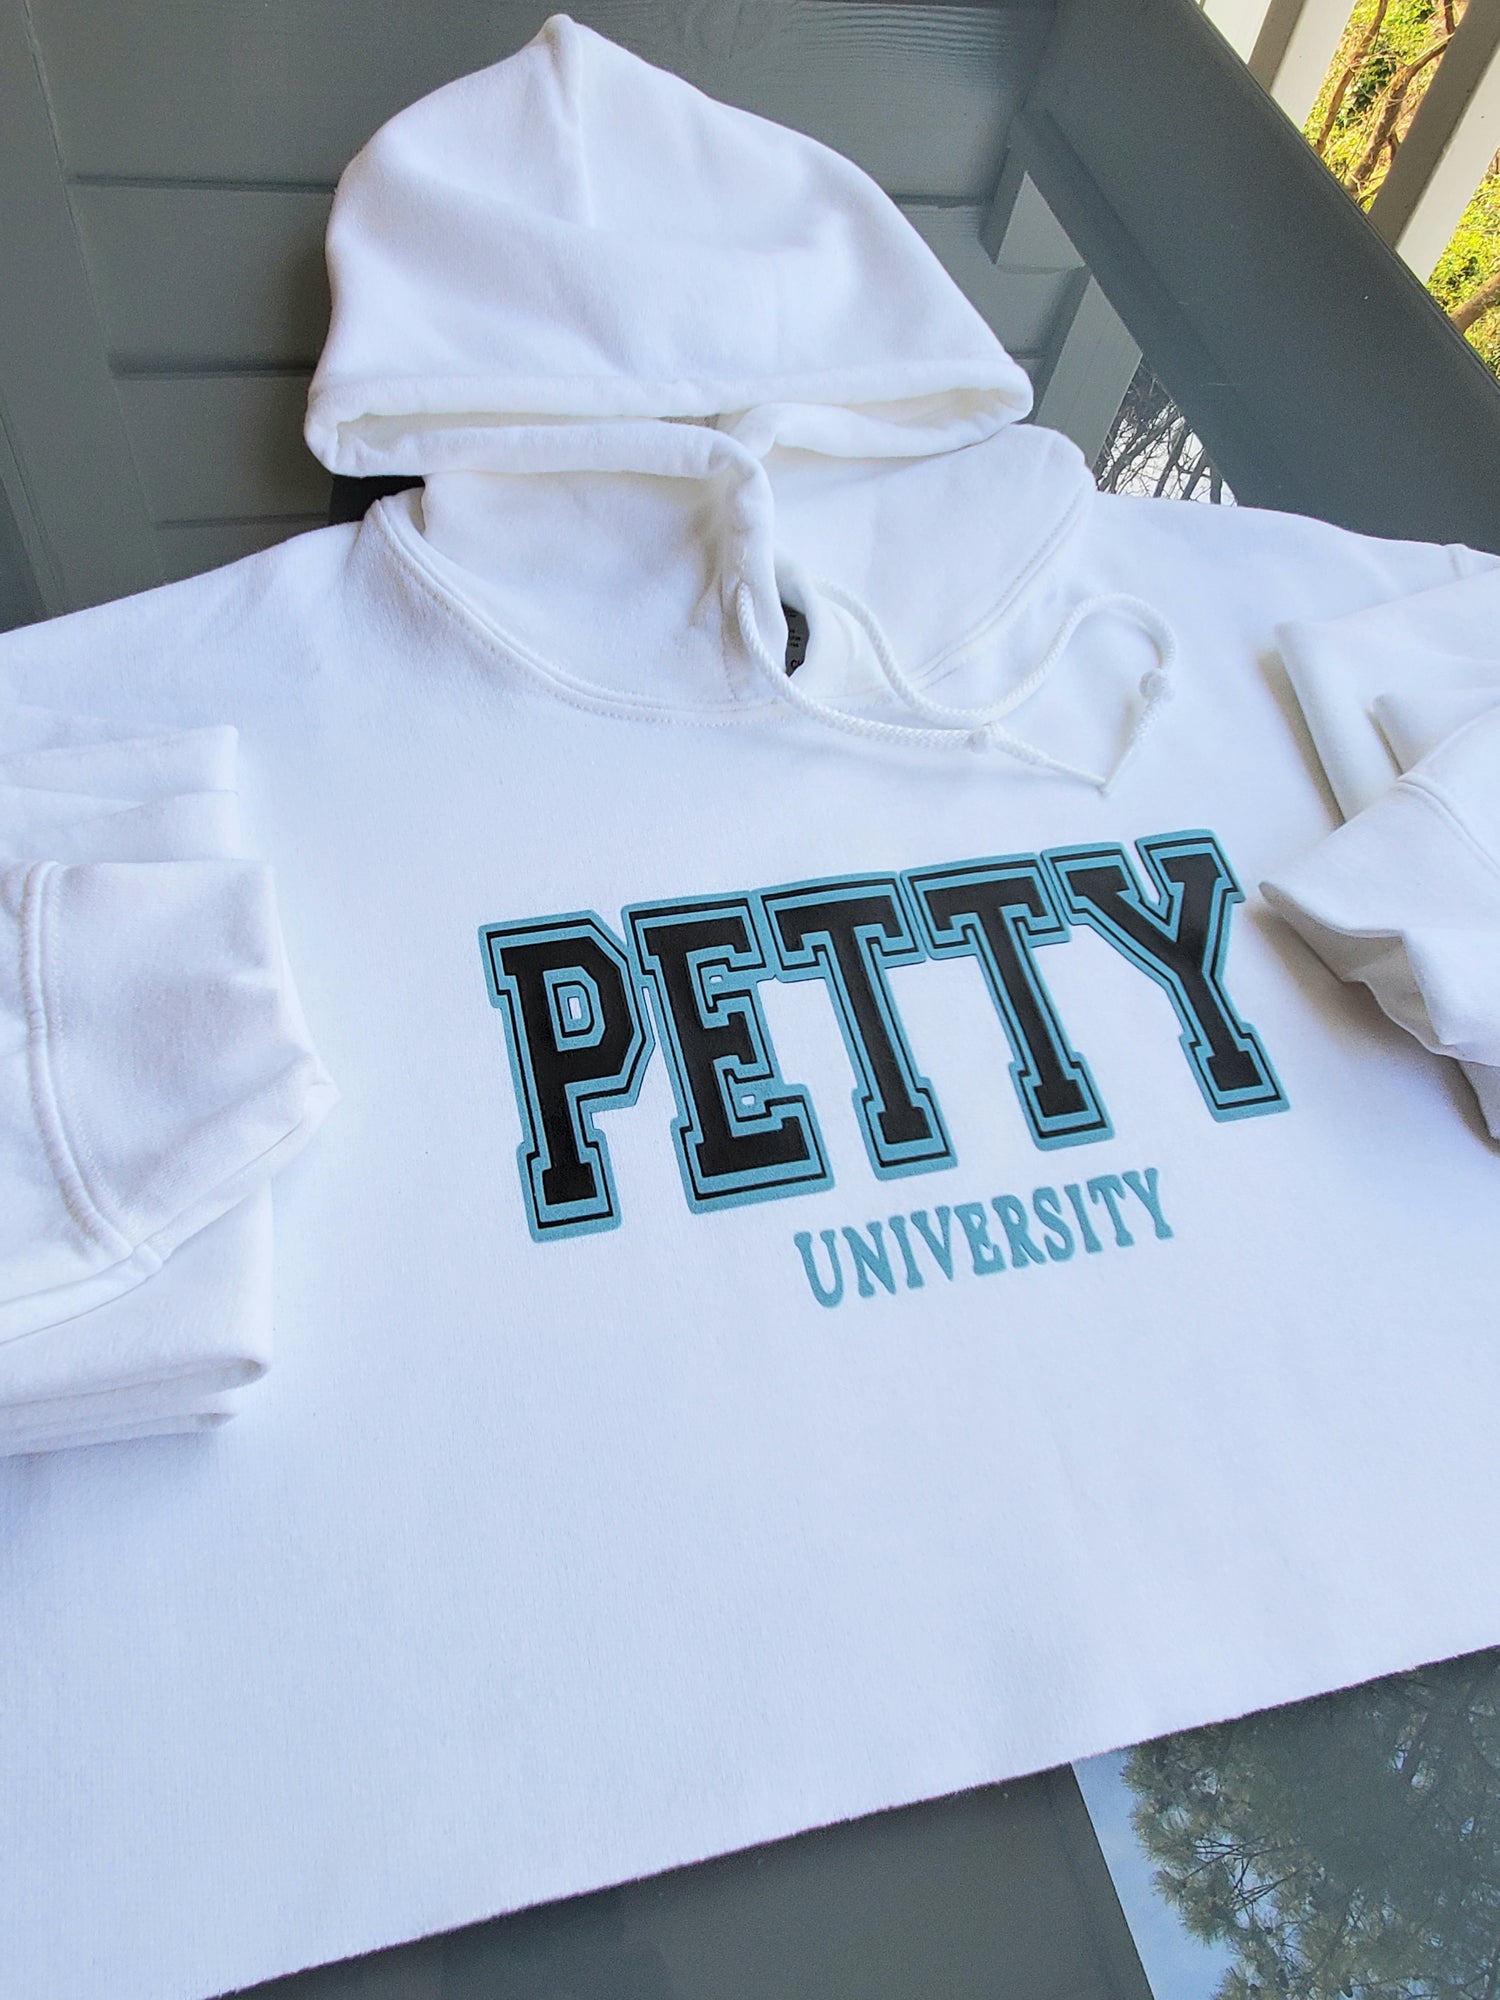 Petty University Cropped Hoodie - Centre Ave Clothing Co.